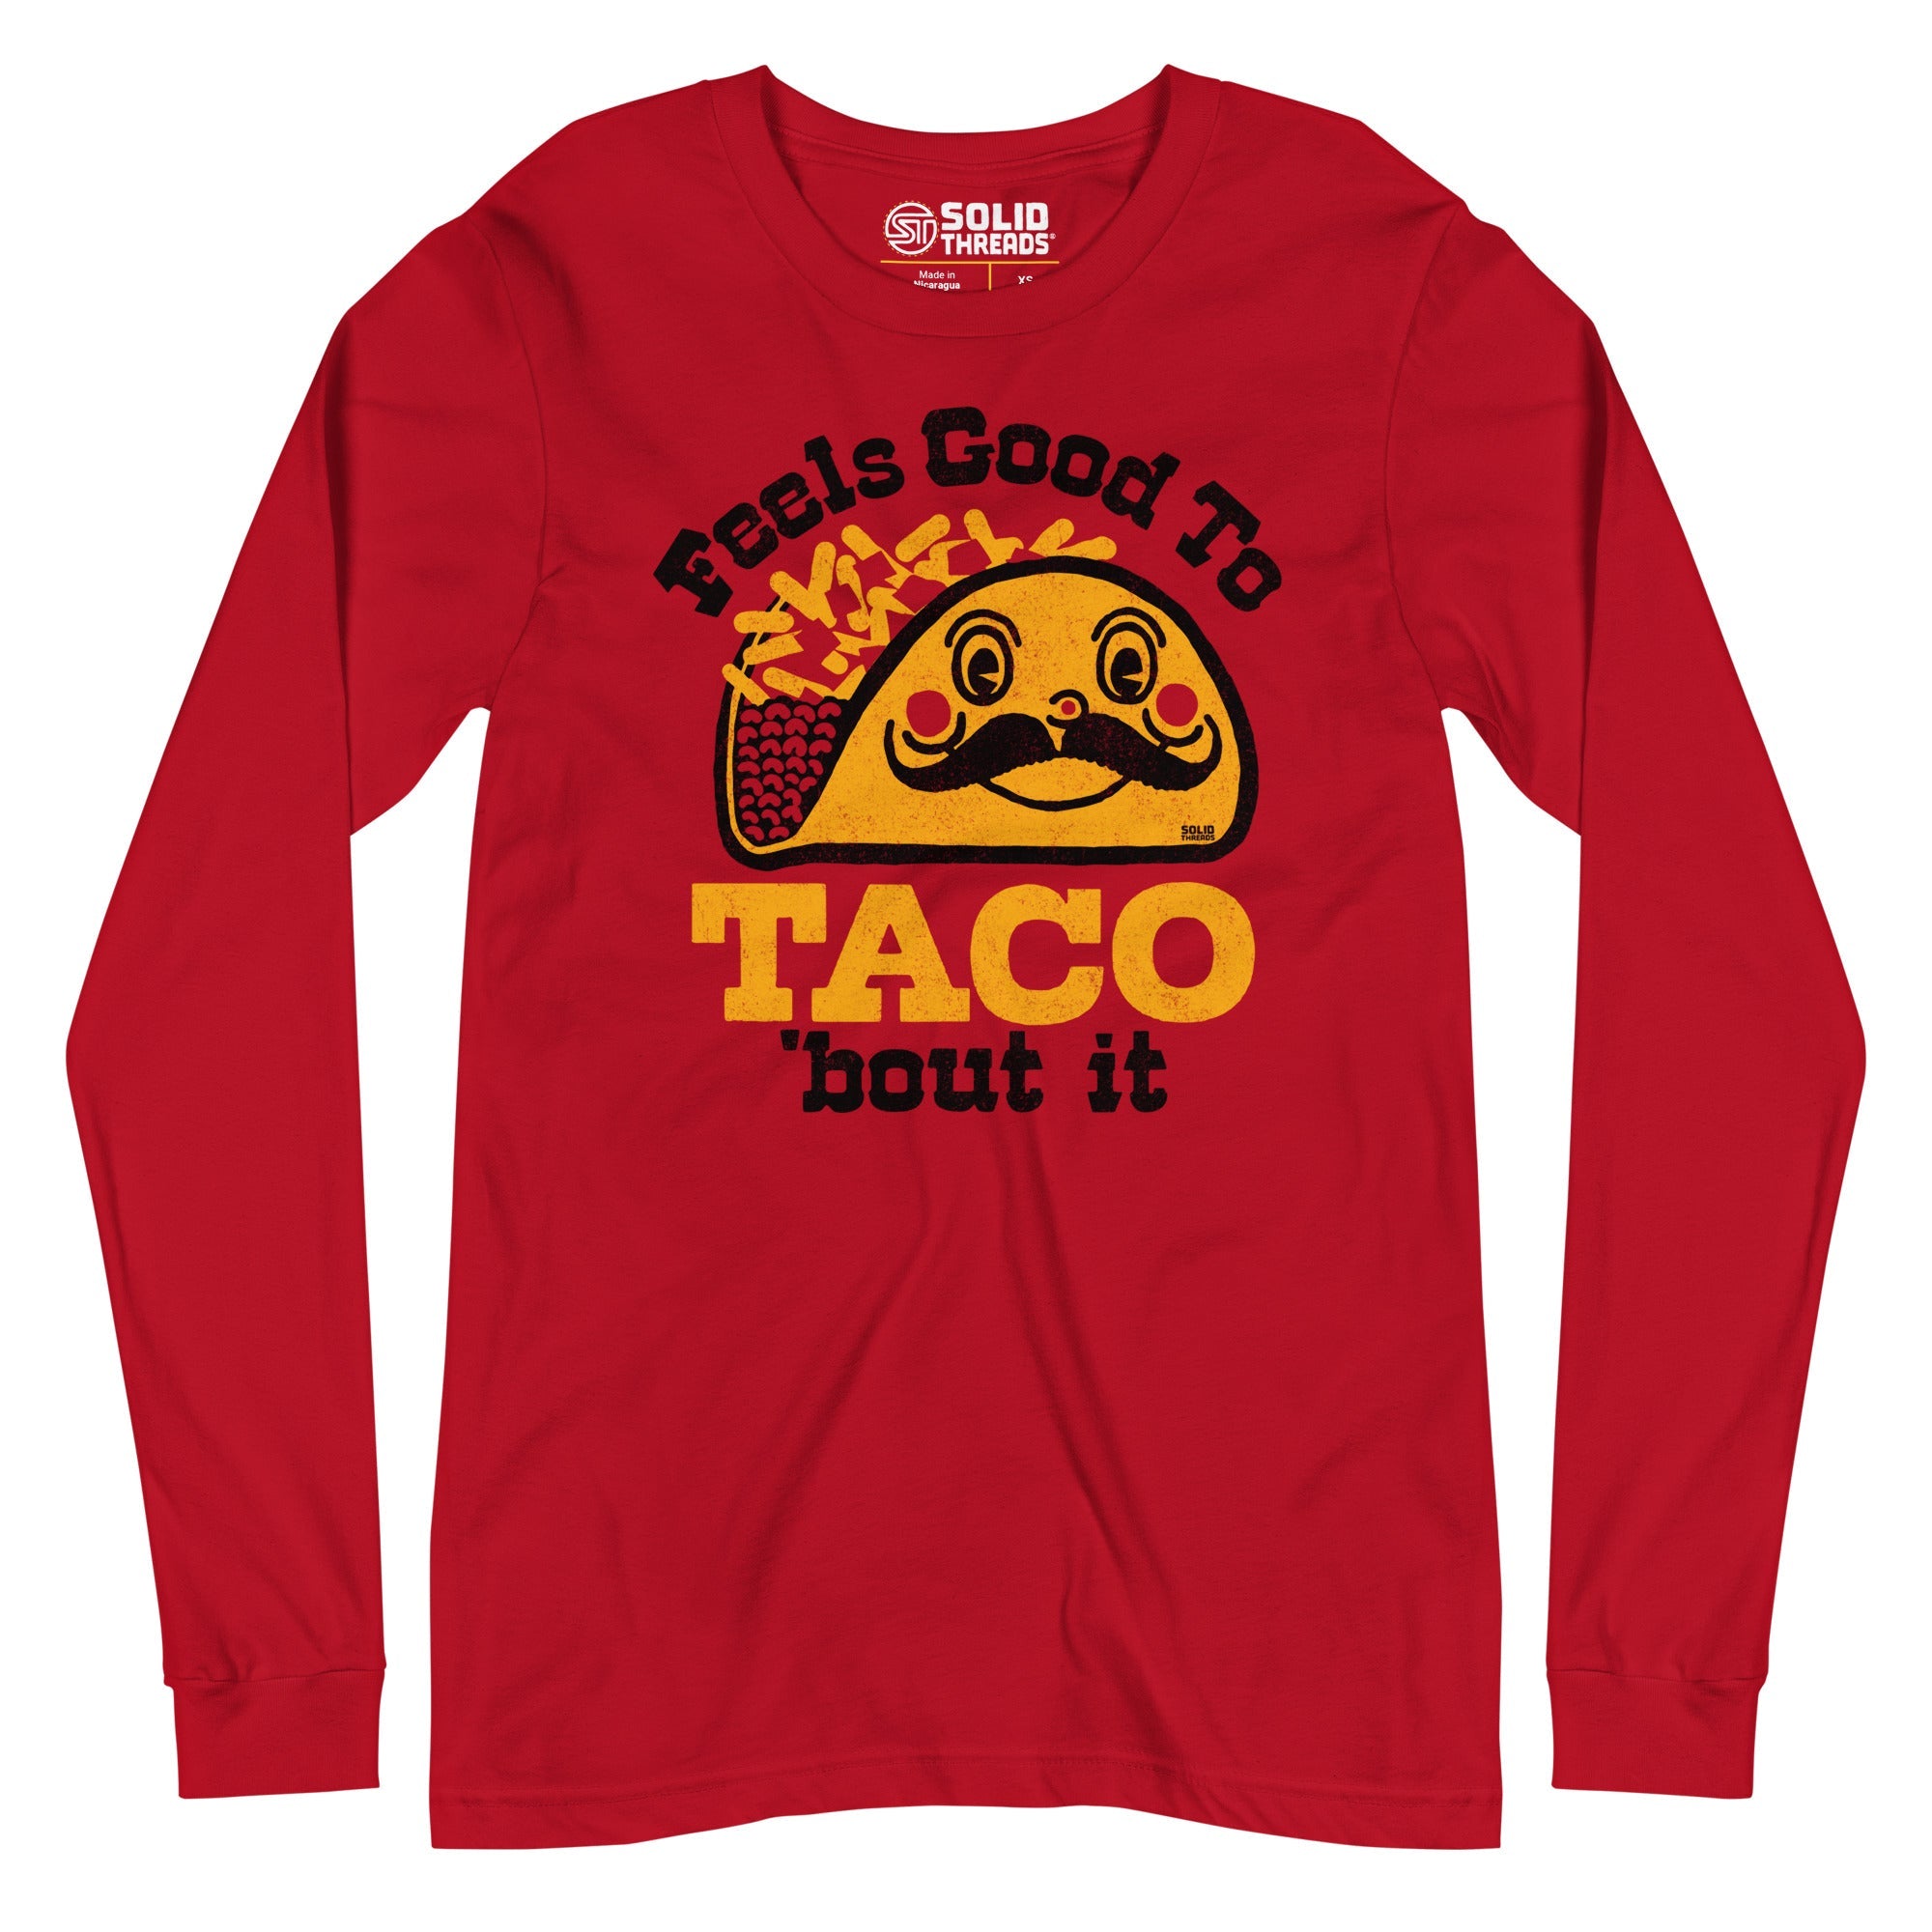 Men's Feels Good To Taco Bout It Vintage Long Sleeve T Shirt | Funny Mexican Food Graphic Tee | Solid Threads